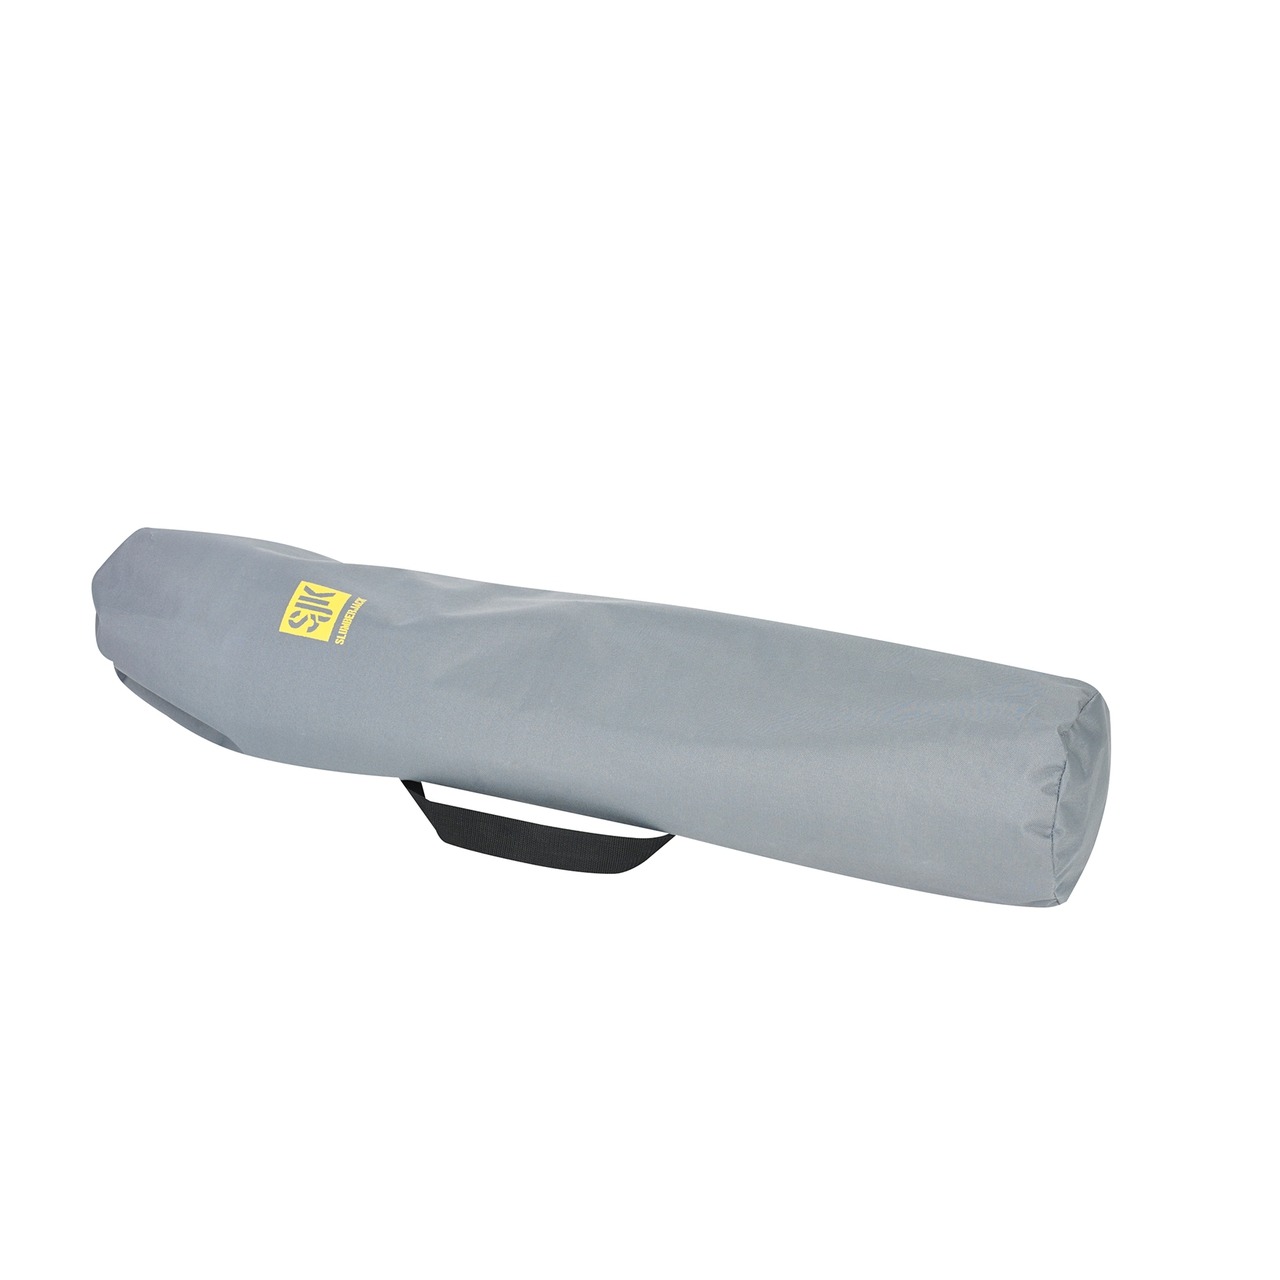 Emergency cot, shown folded up inside its grey cylindrical carry case.